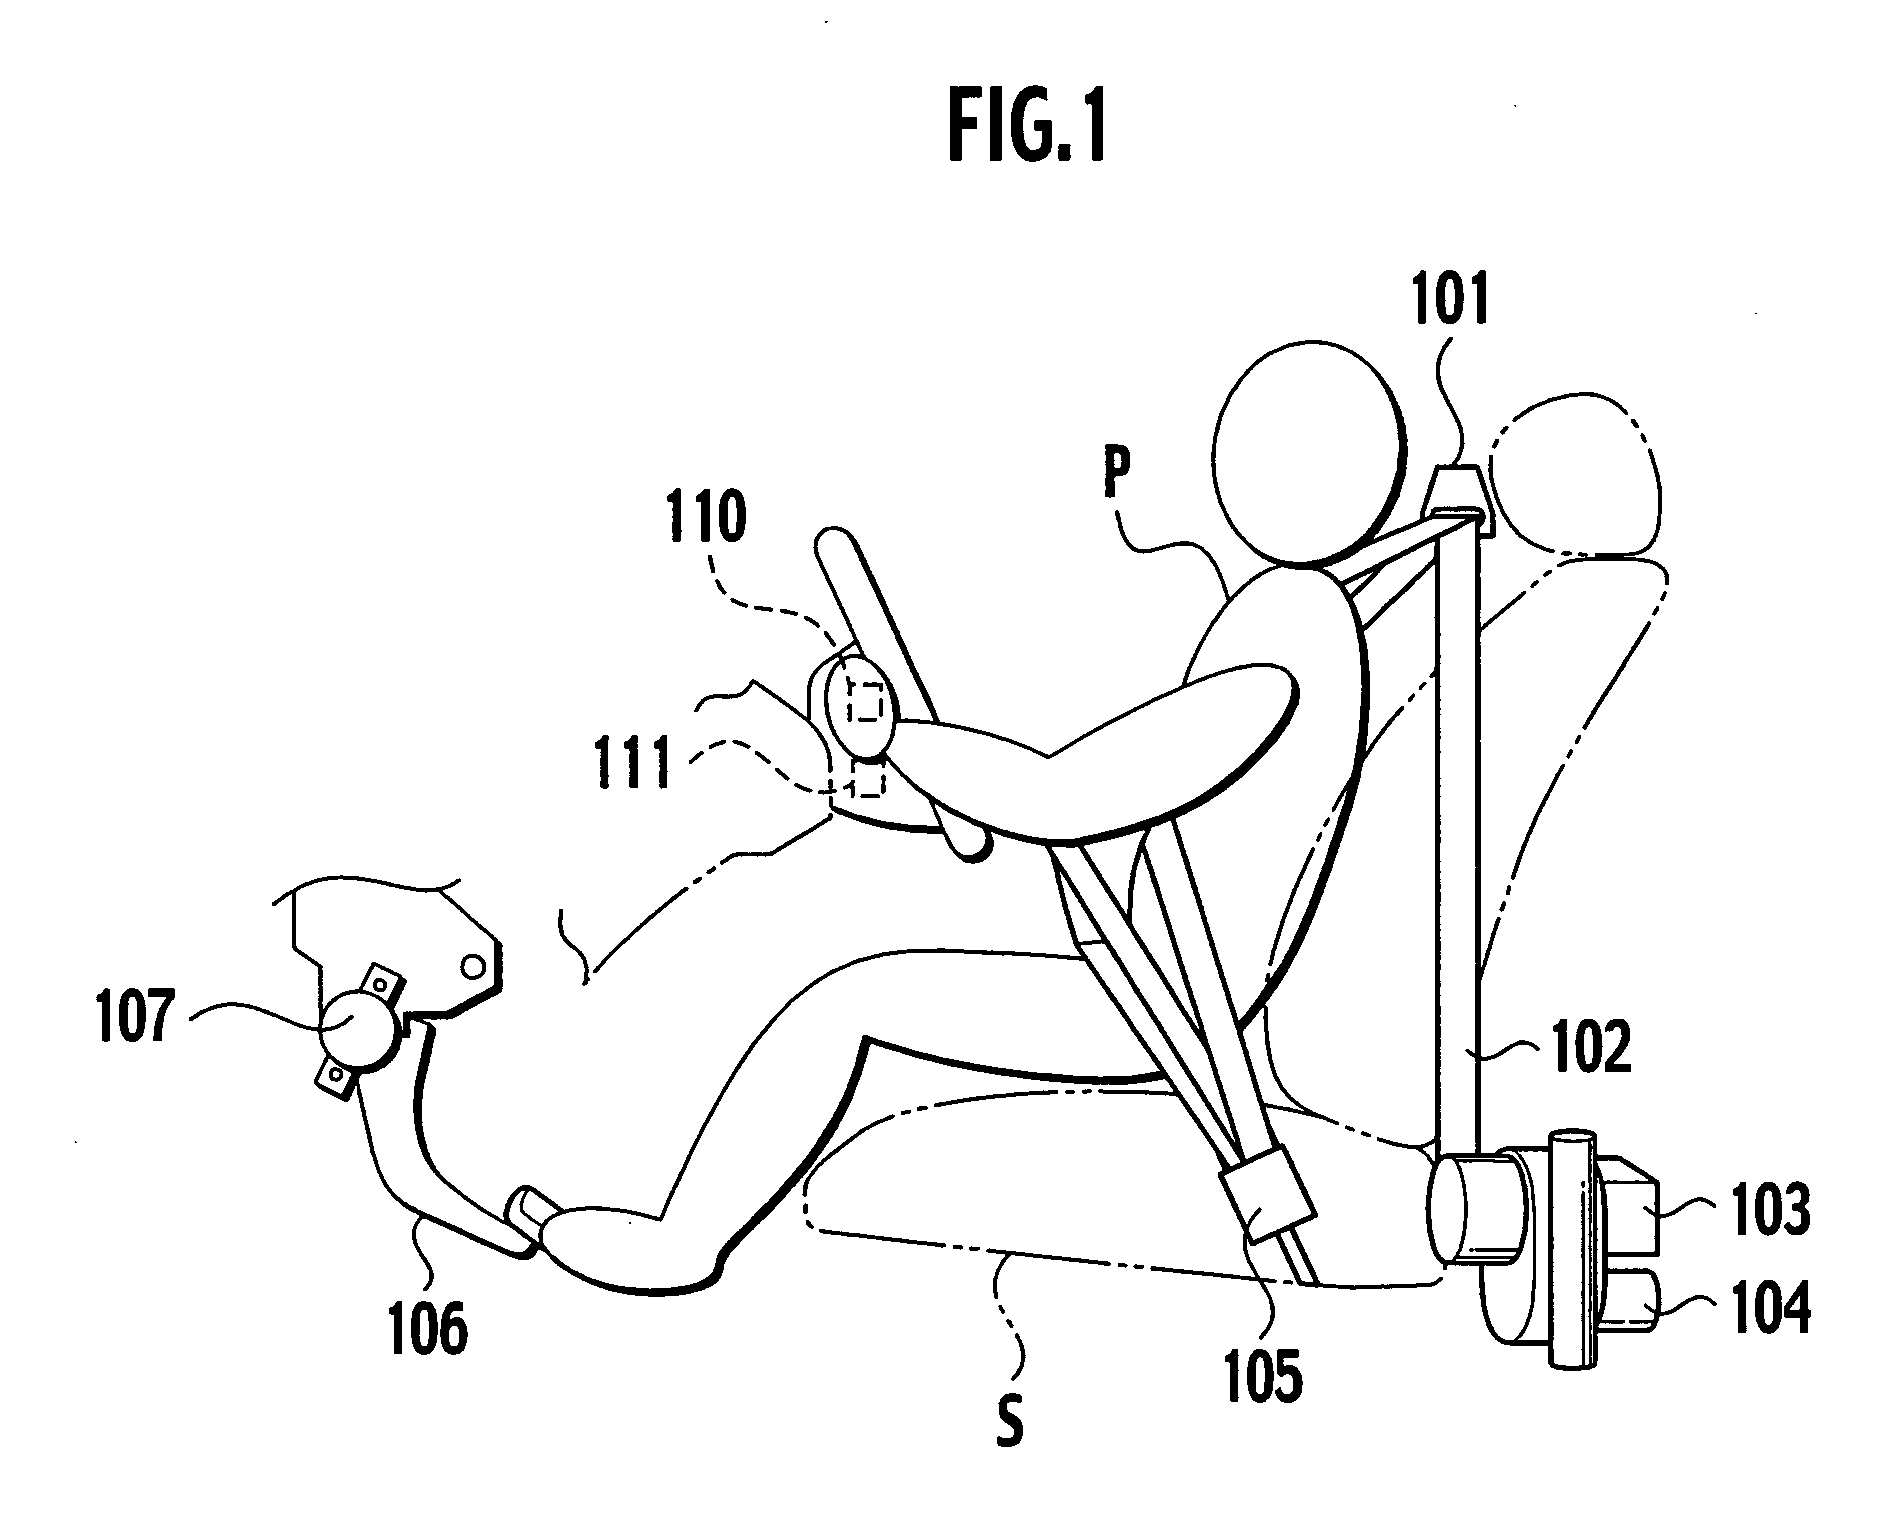 Passenger protection device